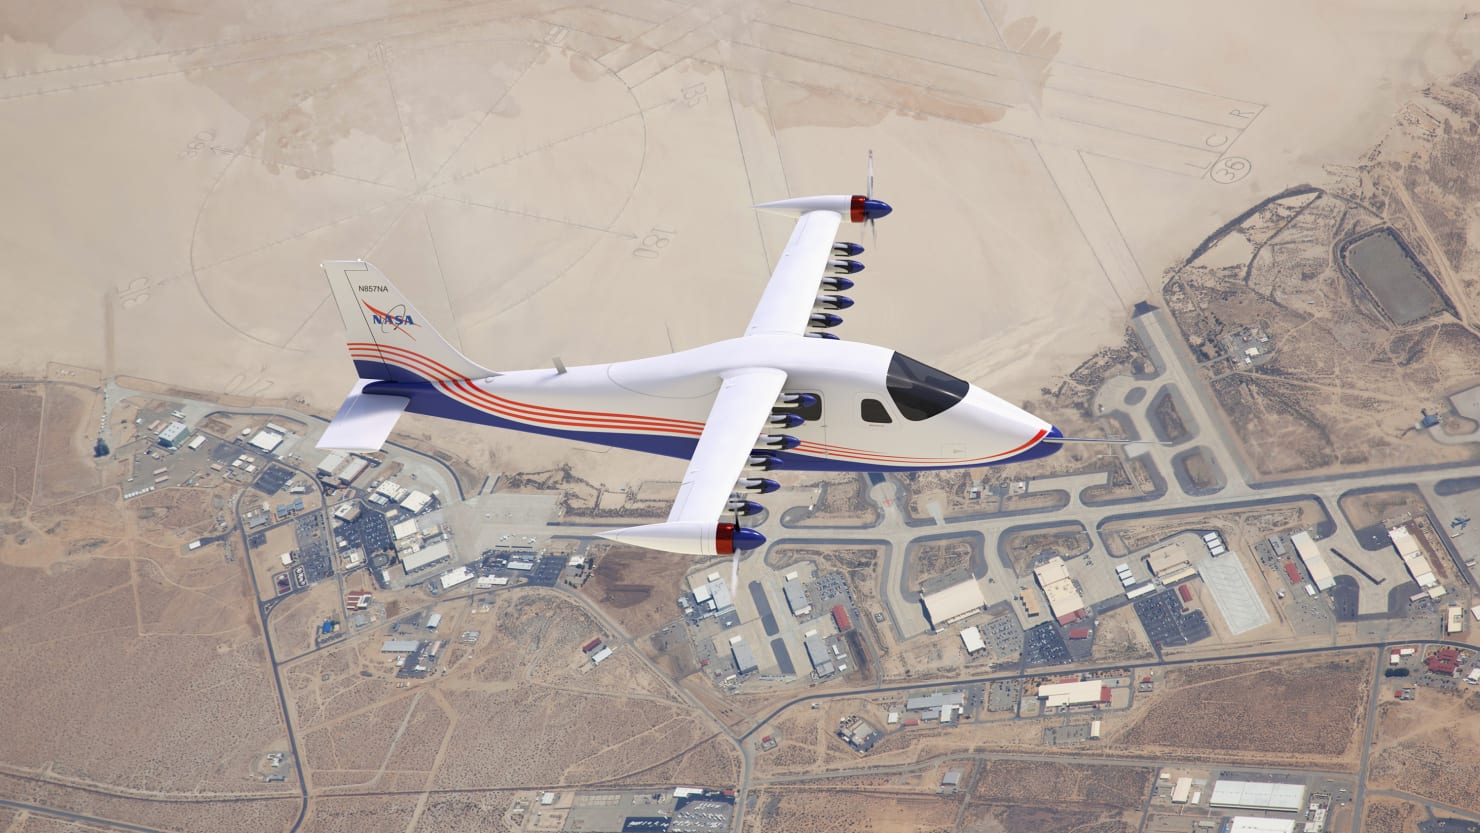 NASAs X-57 All-Electric Plane Set to Take Off and Launch New Era of Aviation hq pic